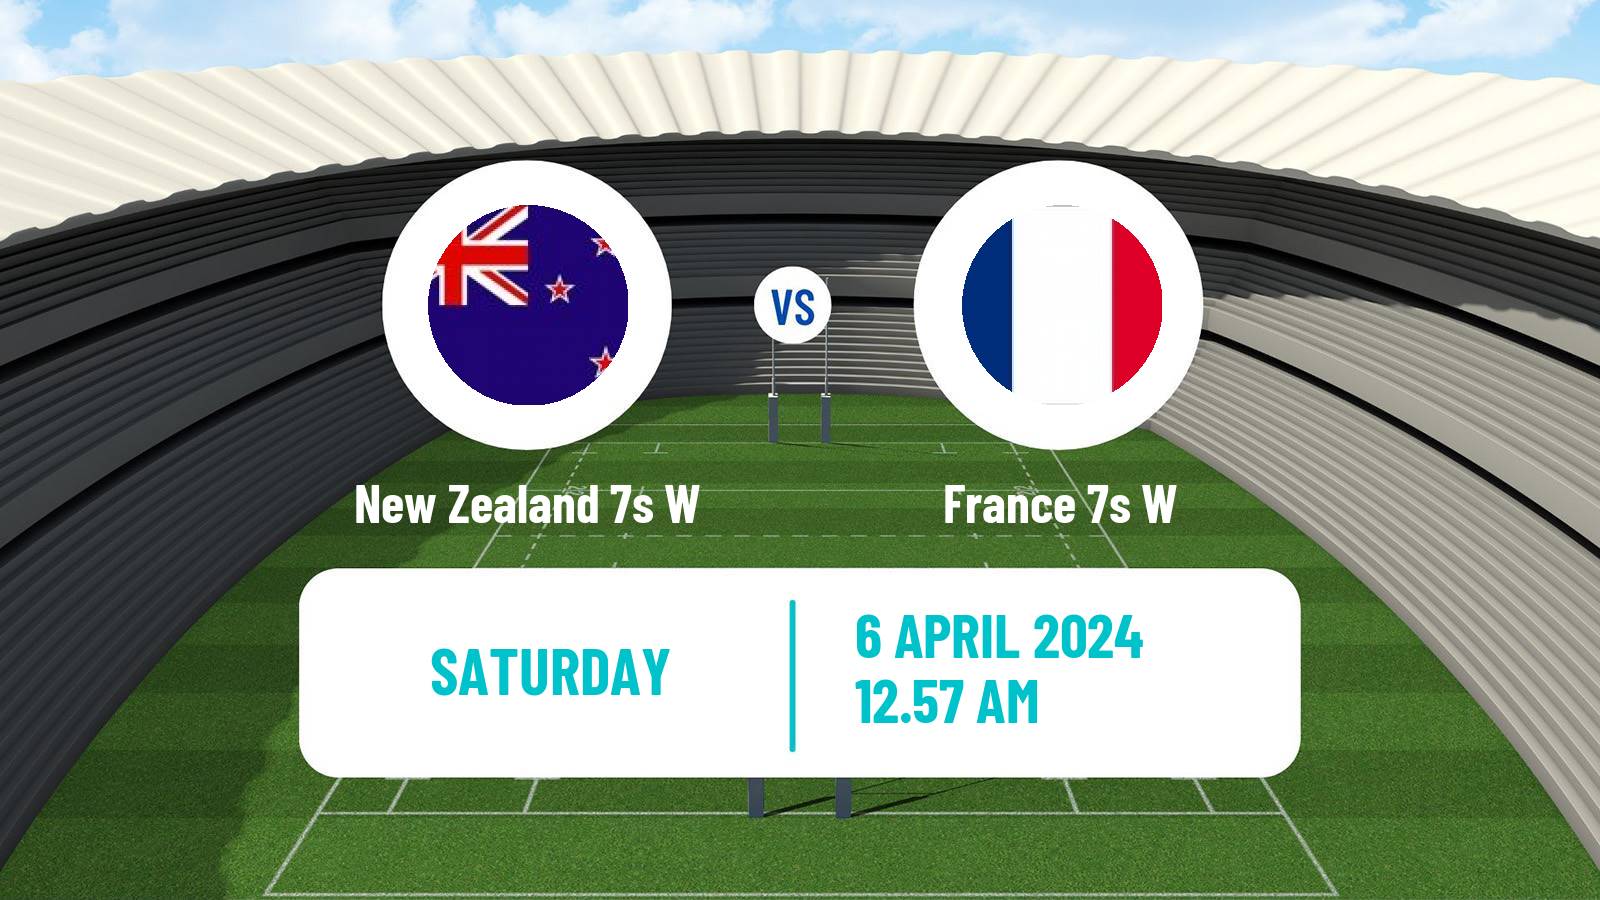 Rugby union Sevens World Series Women - Hong Kong New Zealand 7s W - France 7s W